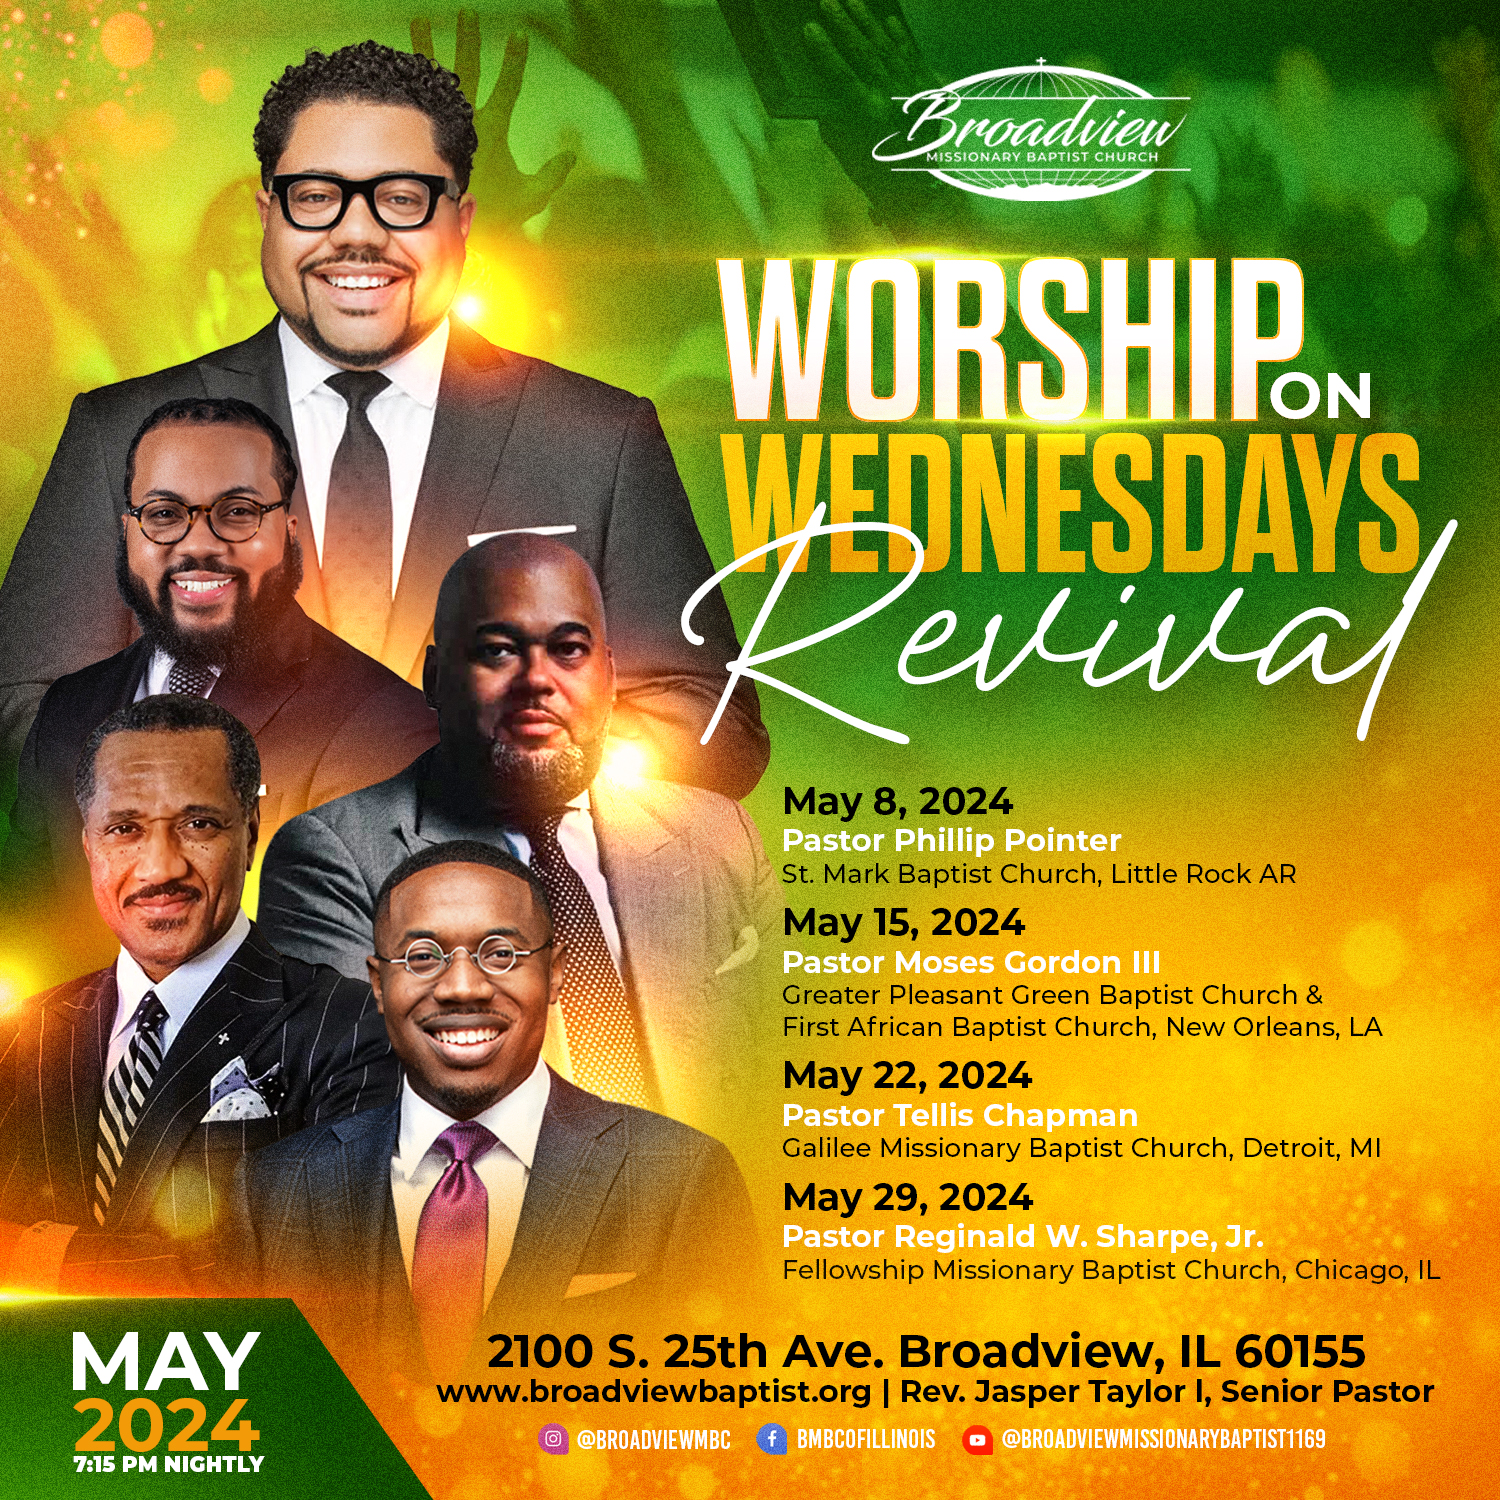 Broadview Worship on Wednesday Revival Graphic 1x1 1 image